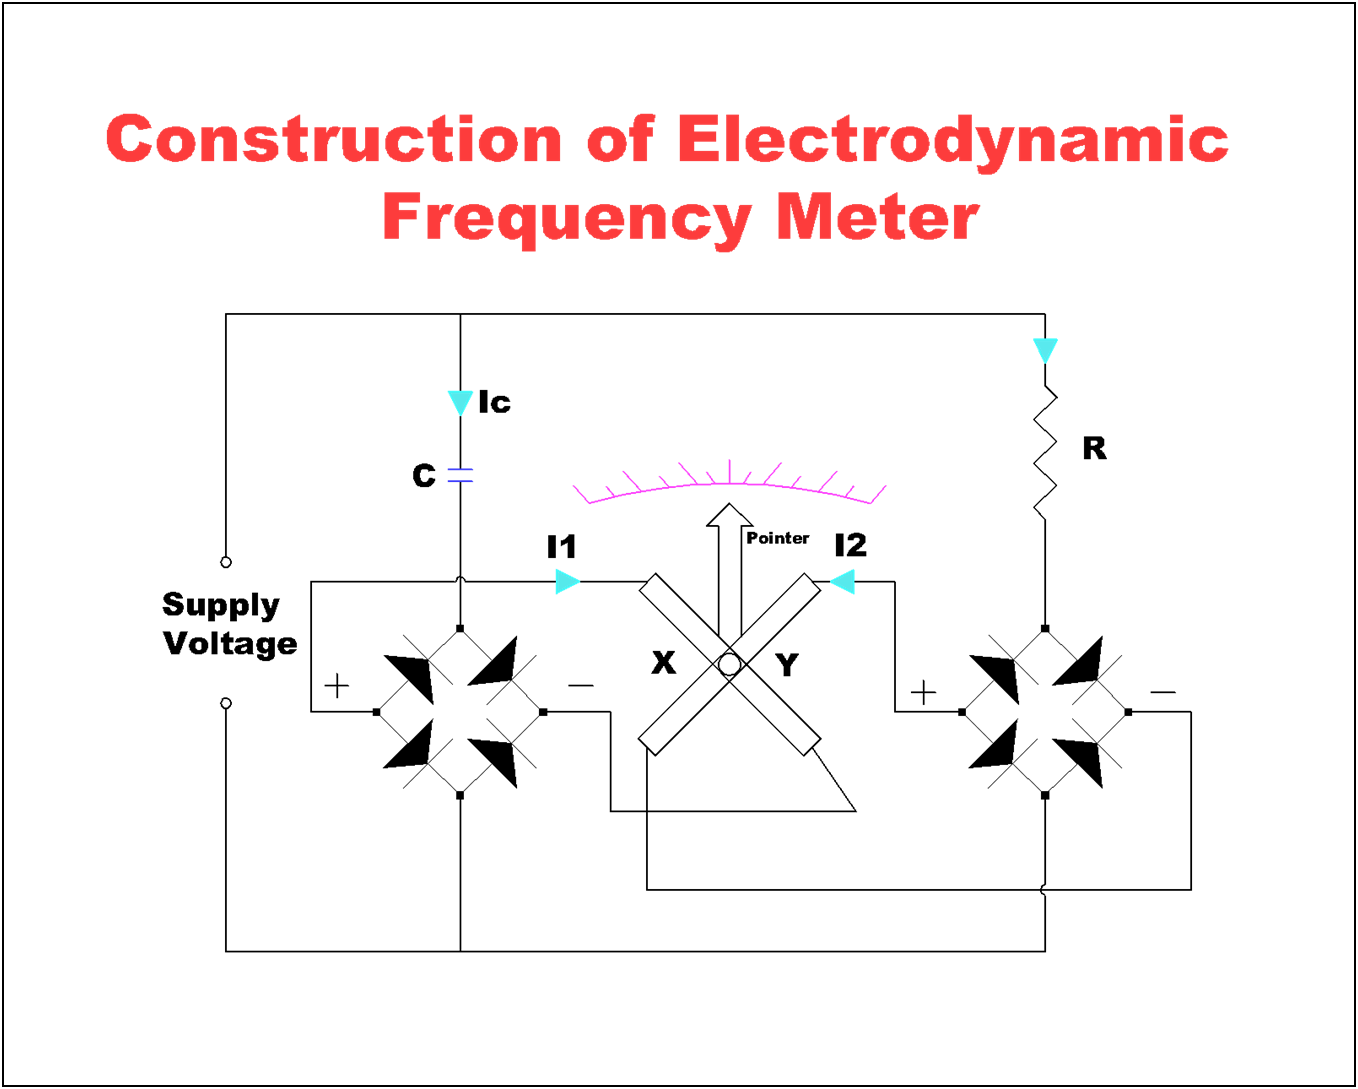 Construction of Electrodynamic frequency meter